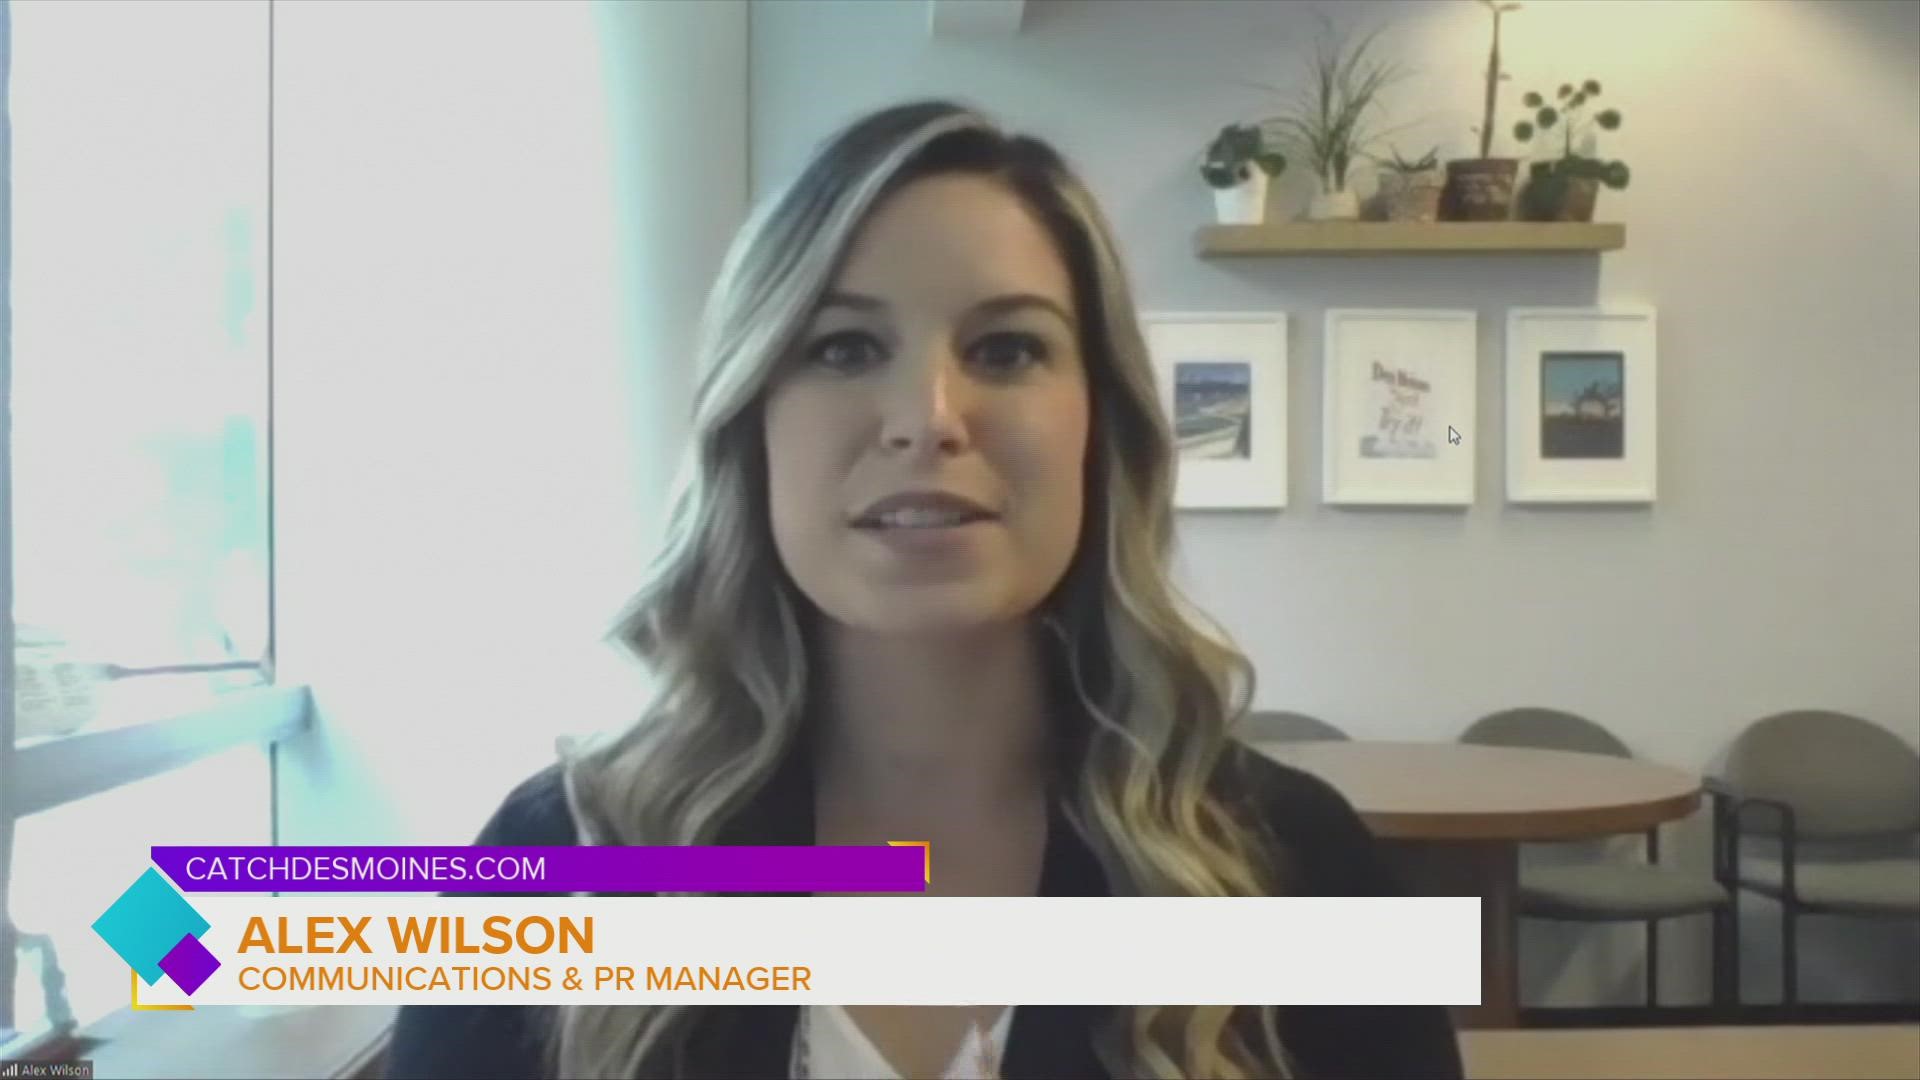 Alex Wilson, Communications & PR Manager of Catch Des Moines shares some of the great things happening in the Des Moines area in the upcoming week.